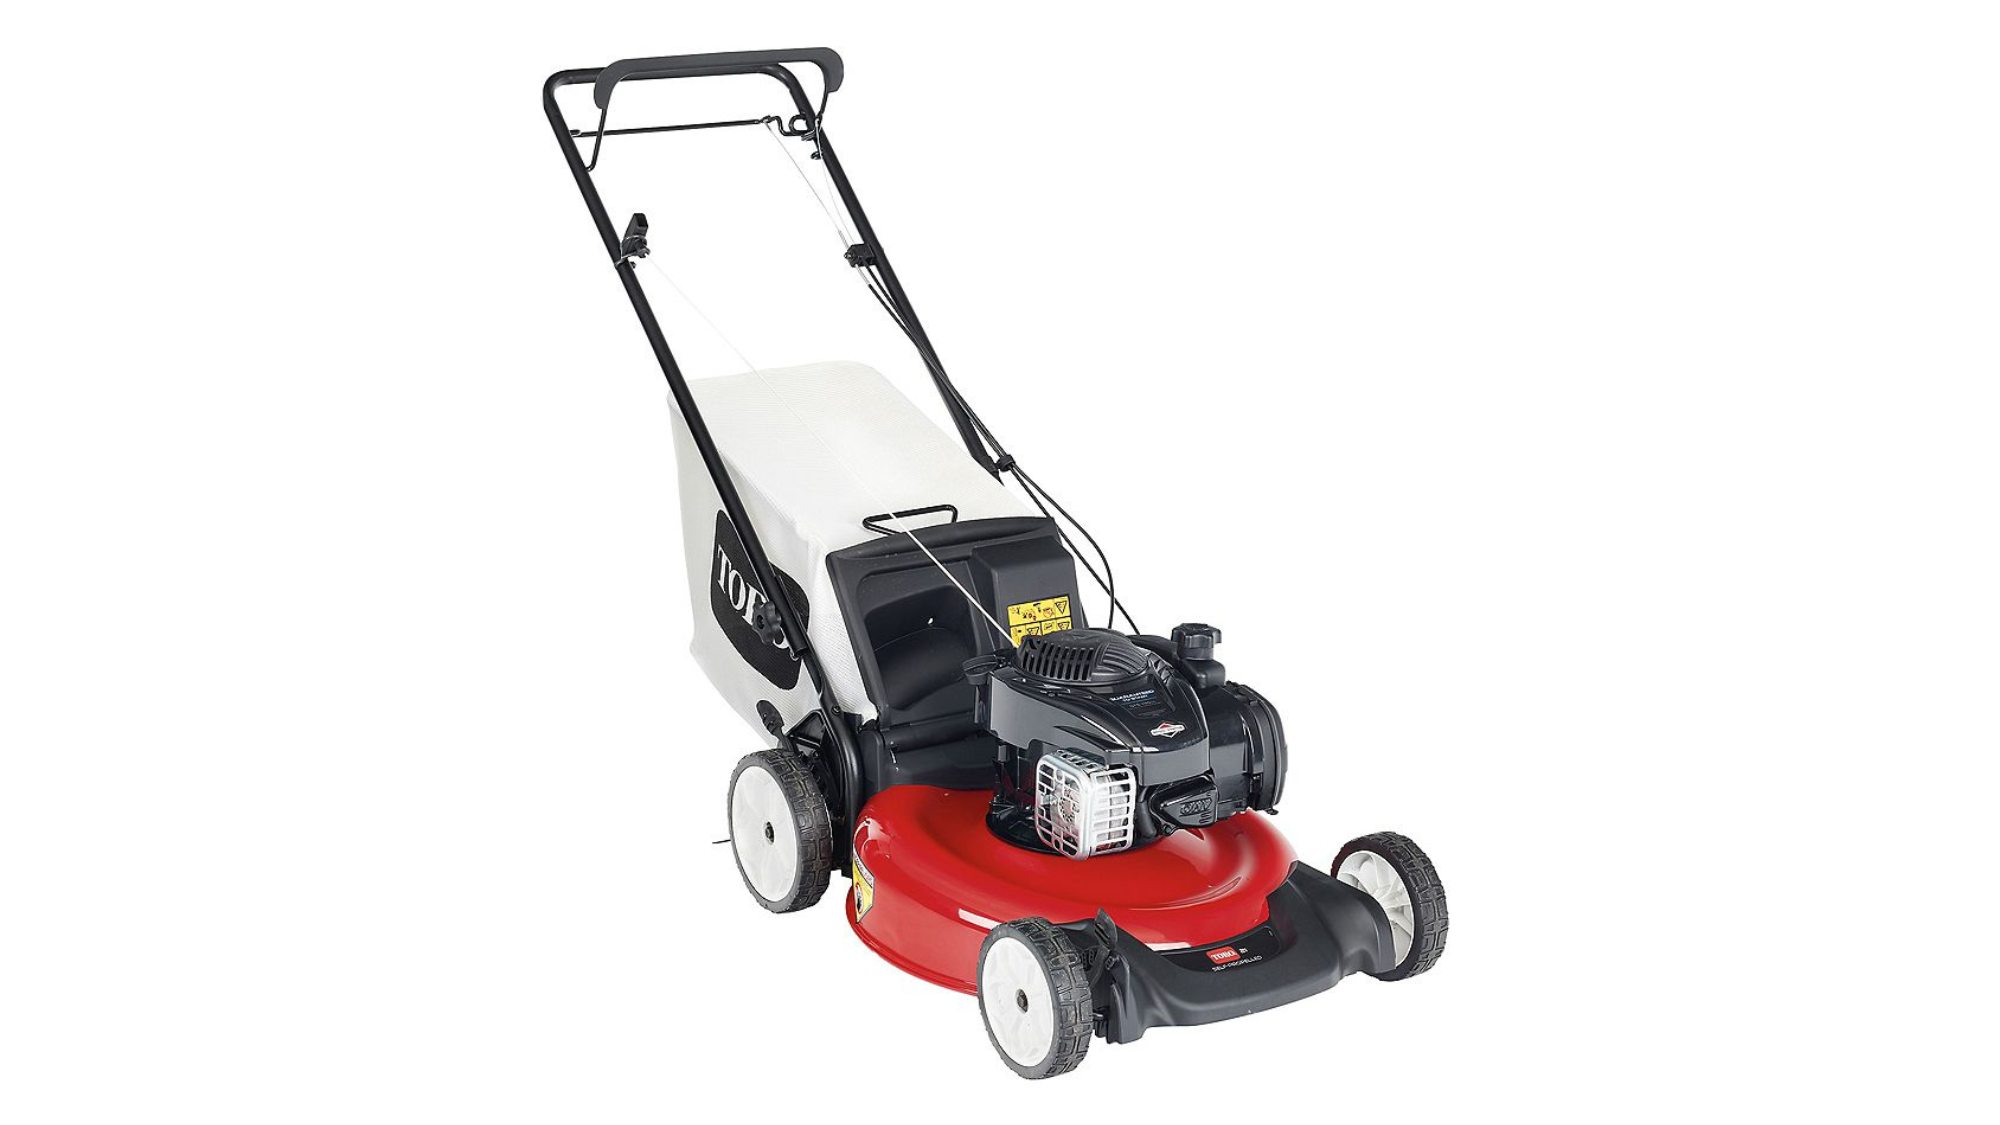 Red and black Toro Recycler 21352 lawn mower on white background